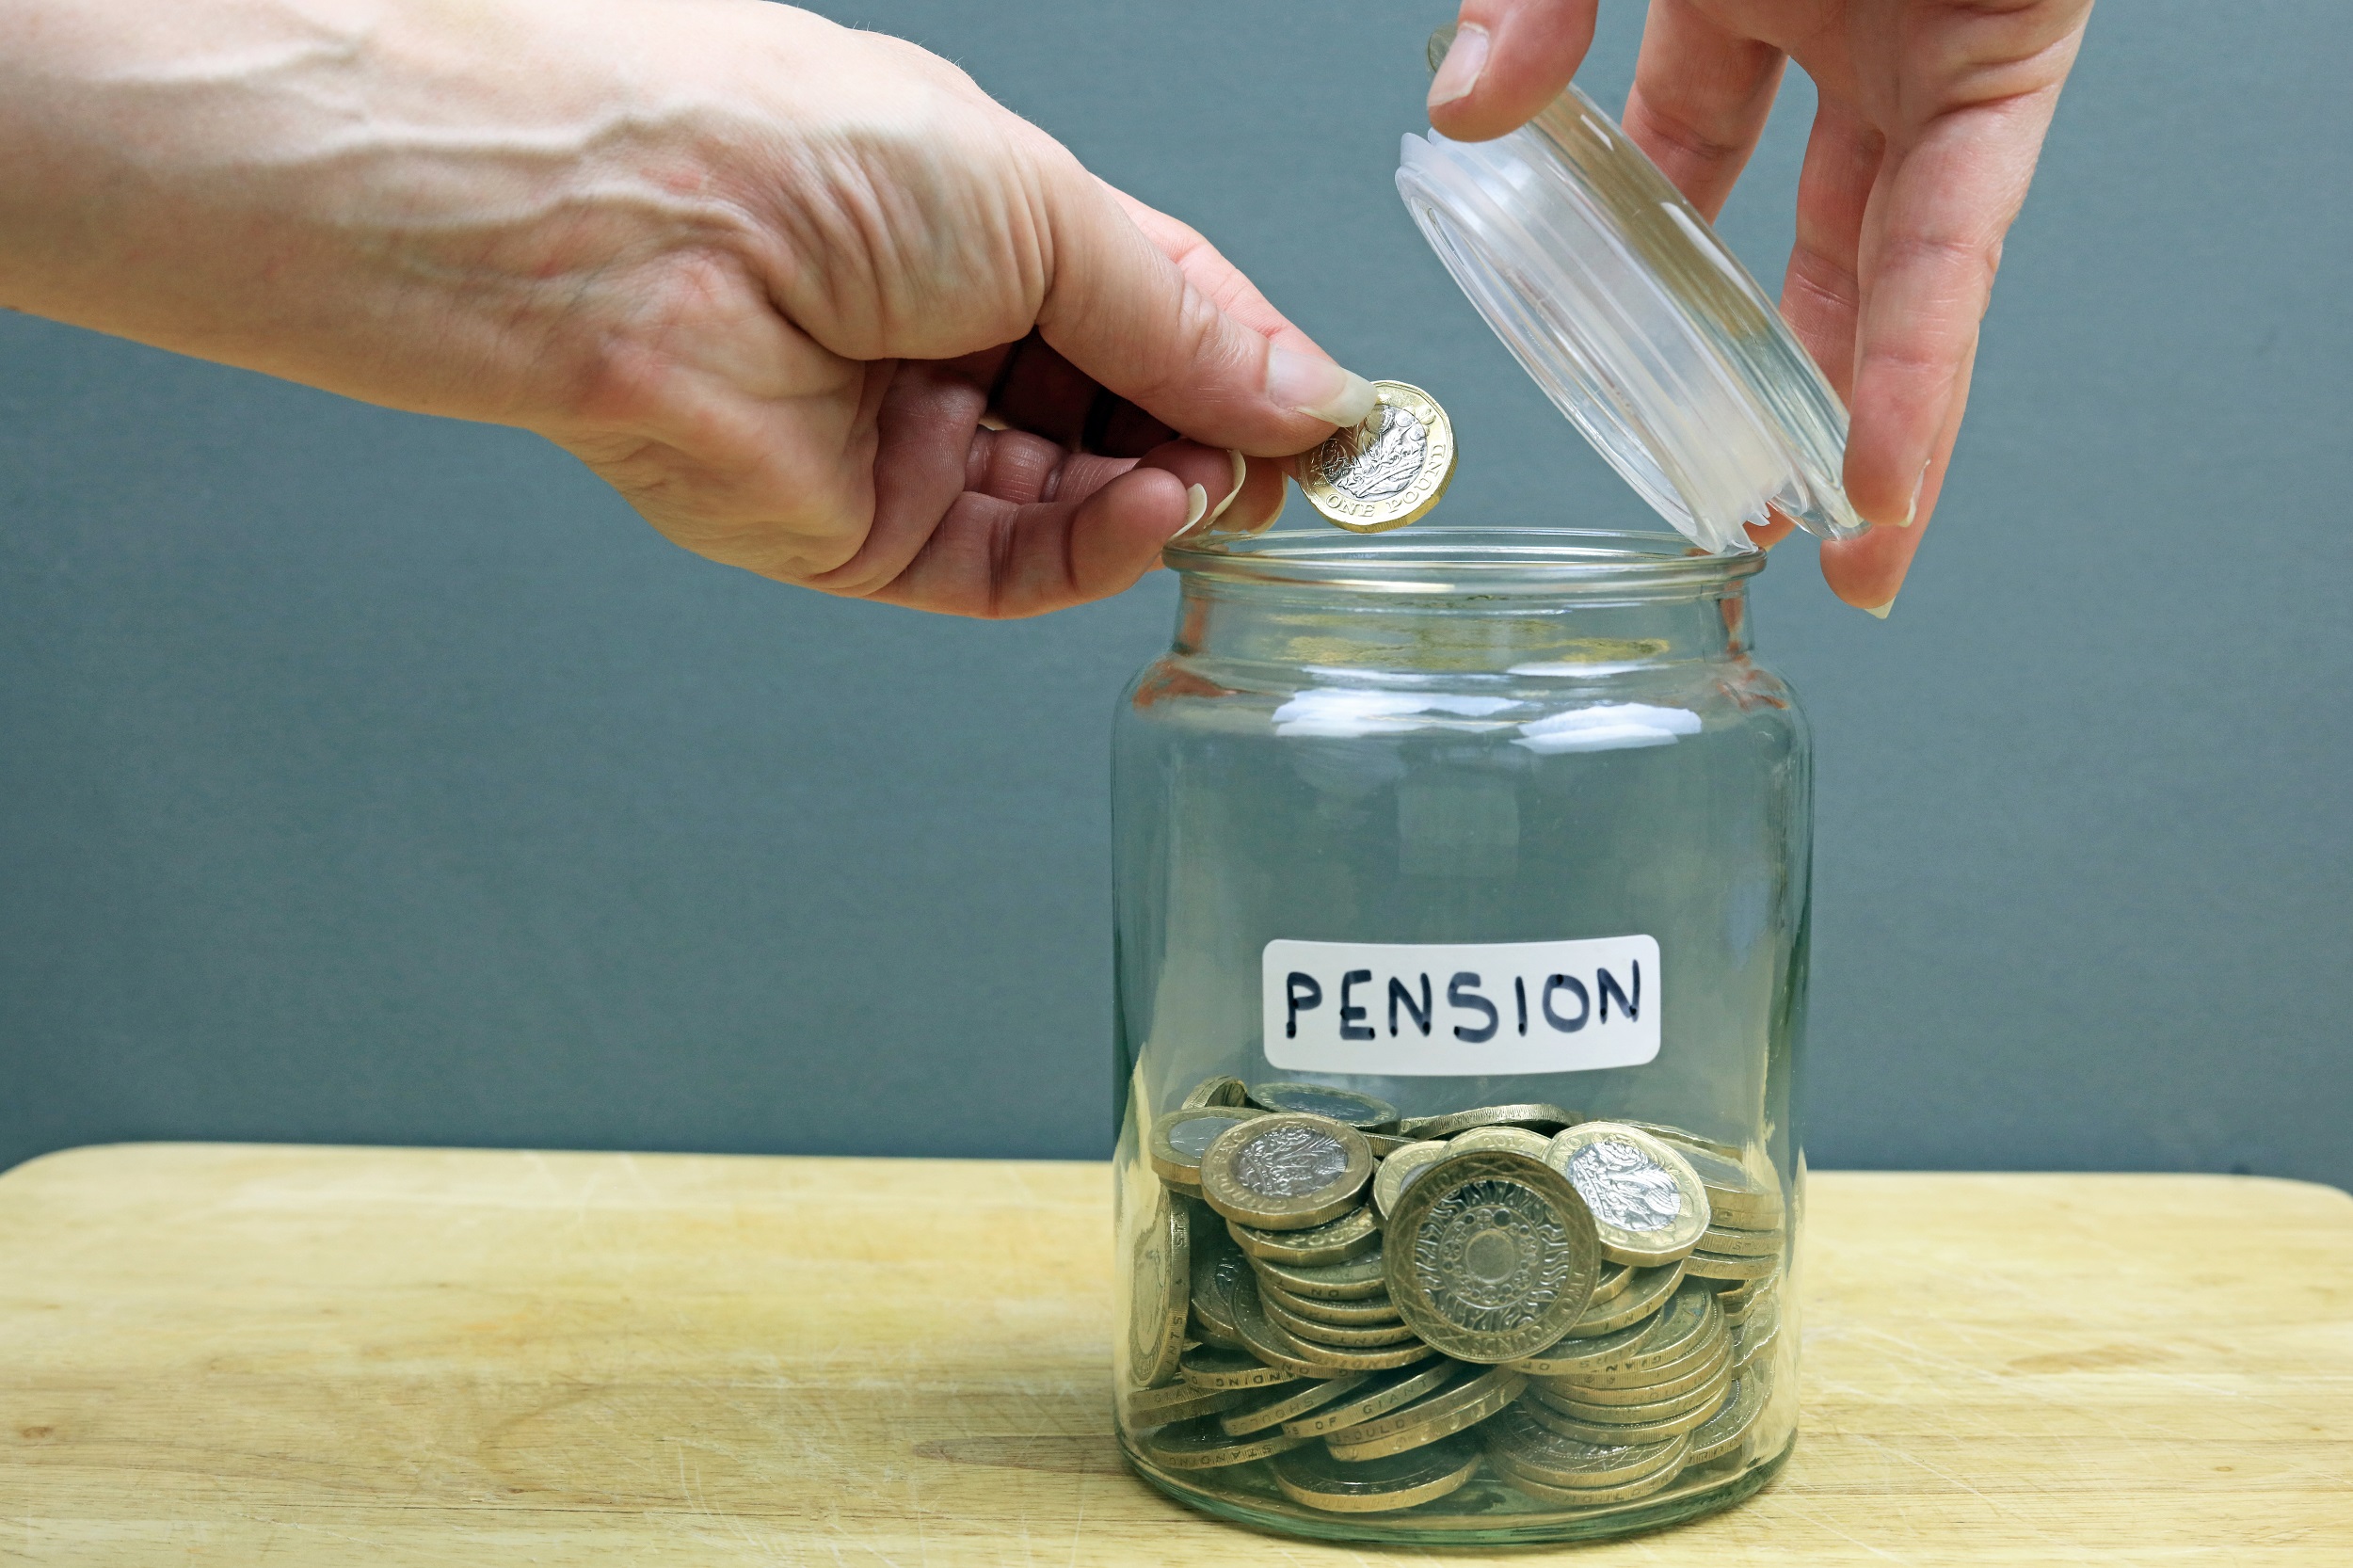 Close up of a person's hands as they place a pound coin into a glass jar which is half full of pound coins. On the jar there is a label with the word 'Pension' written on it.